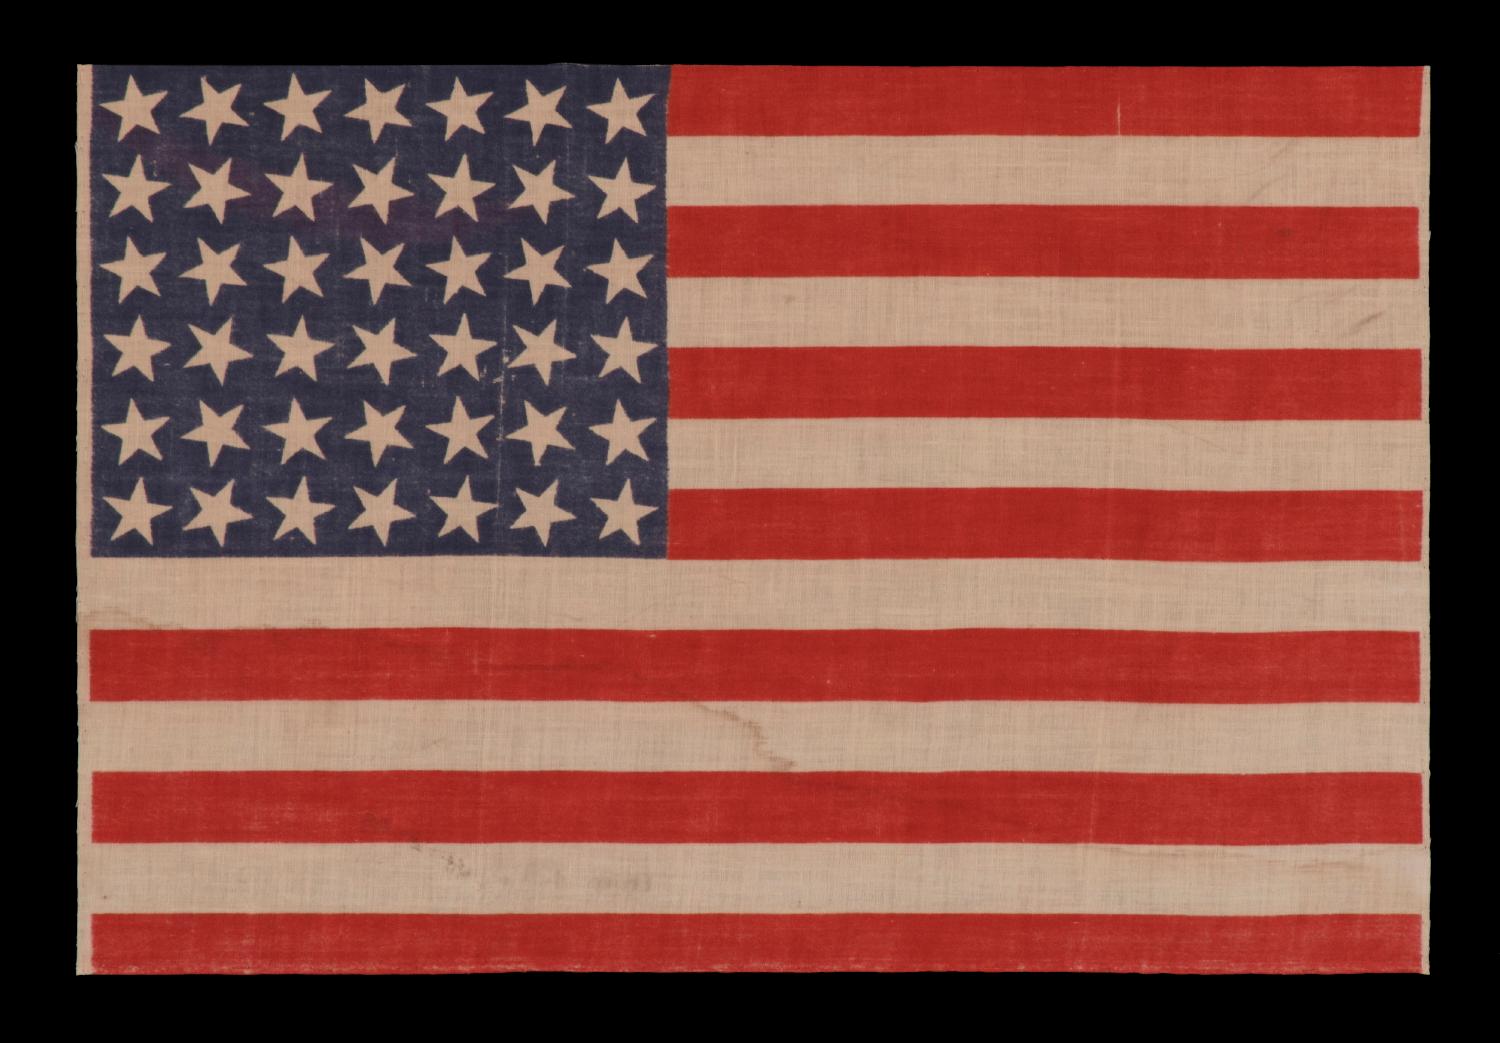 42 stars, an unofficial star count, on an antique American flag with scattered star positioning, 1889-1890, Washington Statehood

42 star parade flag, printed on cotton muslin. The stars are arranged in a rectilinear fashion, but vary in position